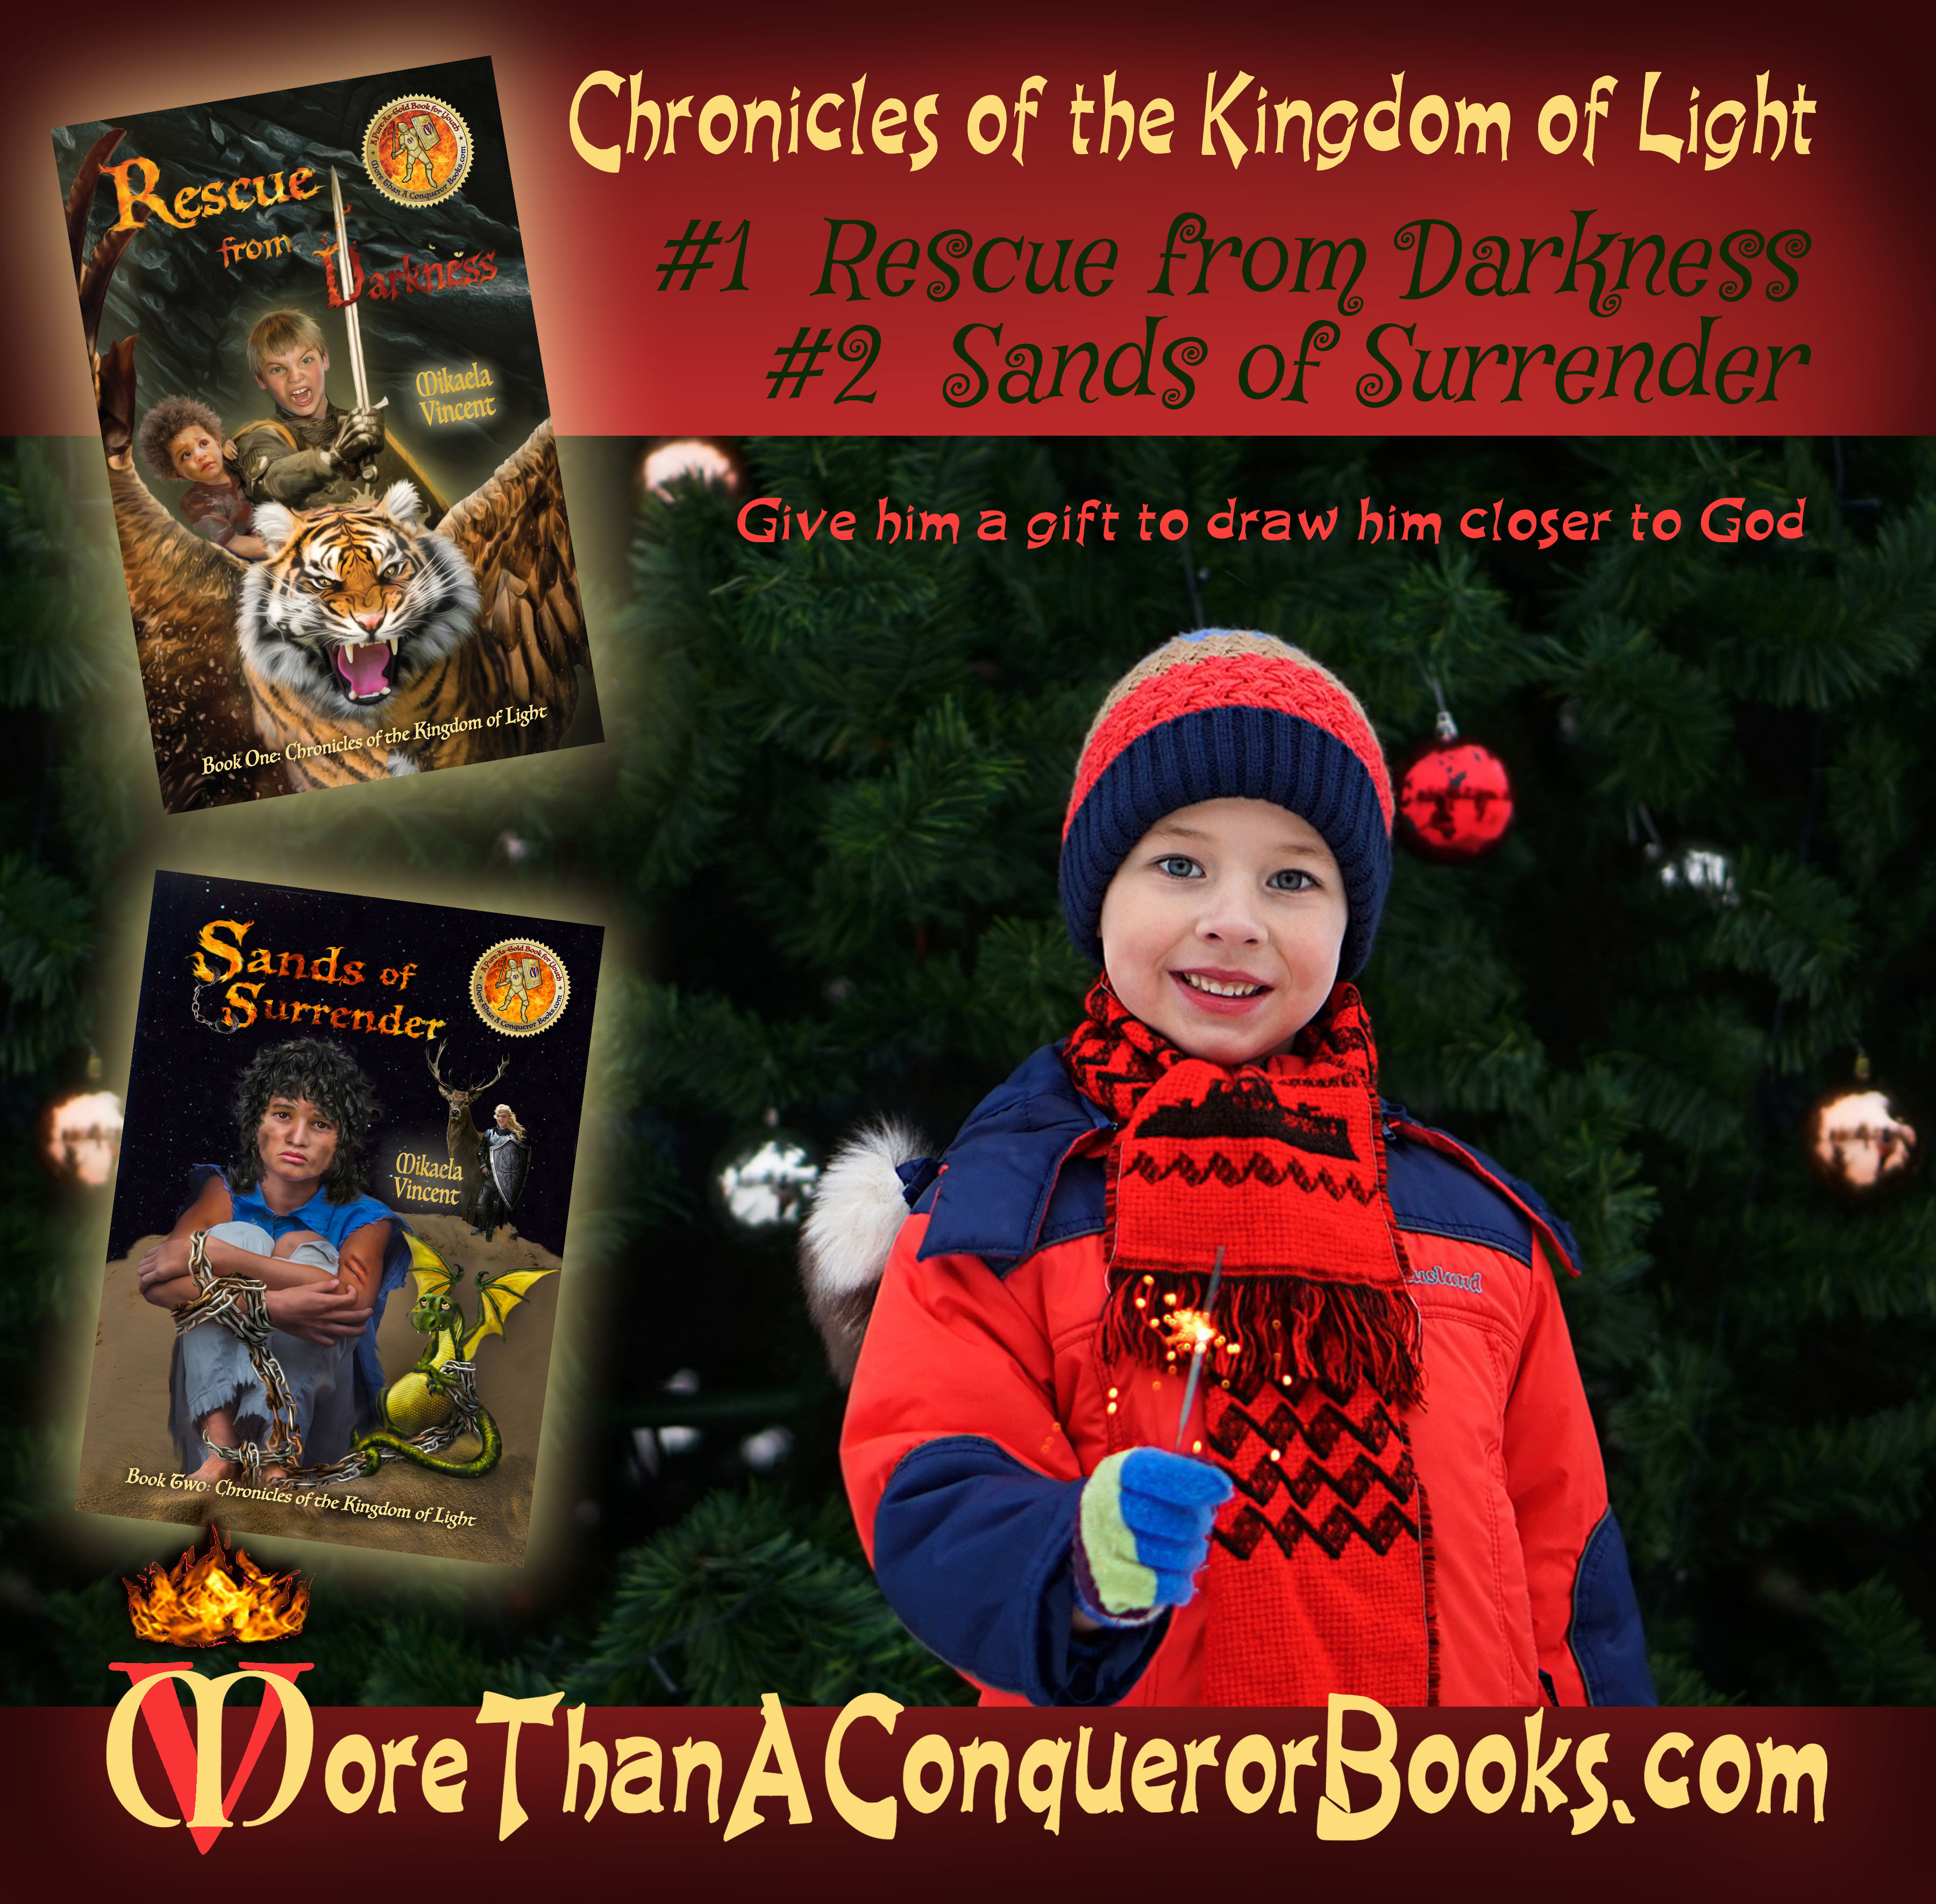 Chronicles of the Kingdom of Light-Rescue from Darkness-Sands of Surrender-good books for kids-Christmas present-Mikaela Vincent-MoreThanAConquerorBooks.jpg